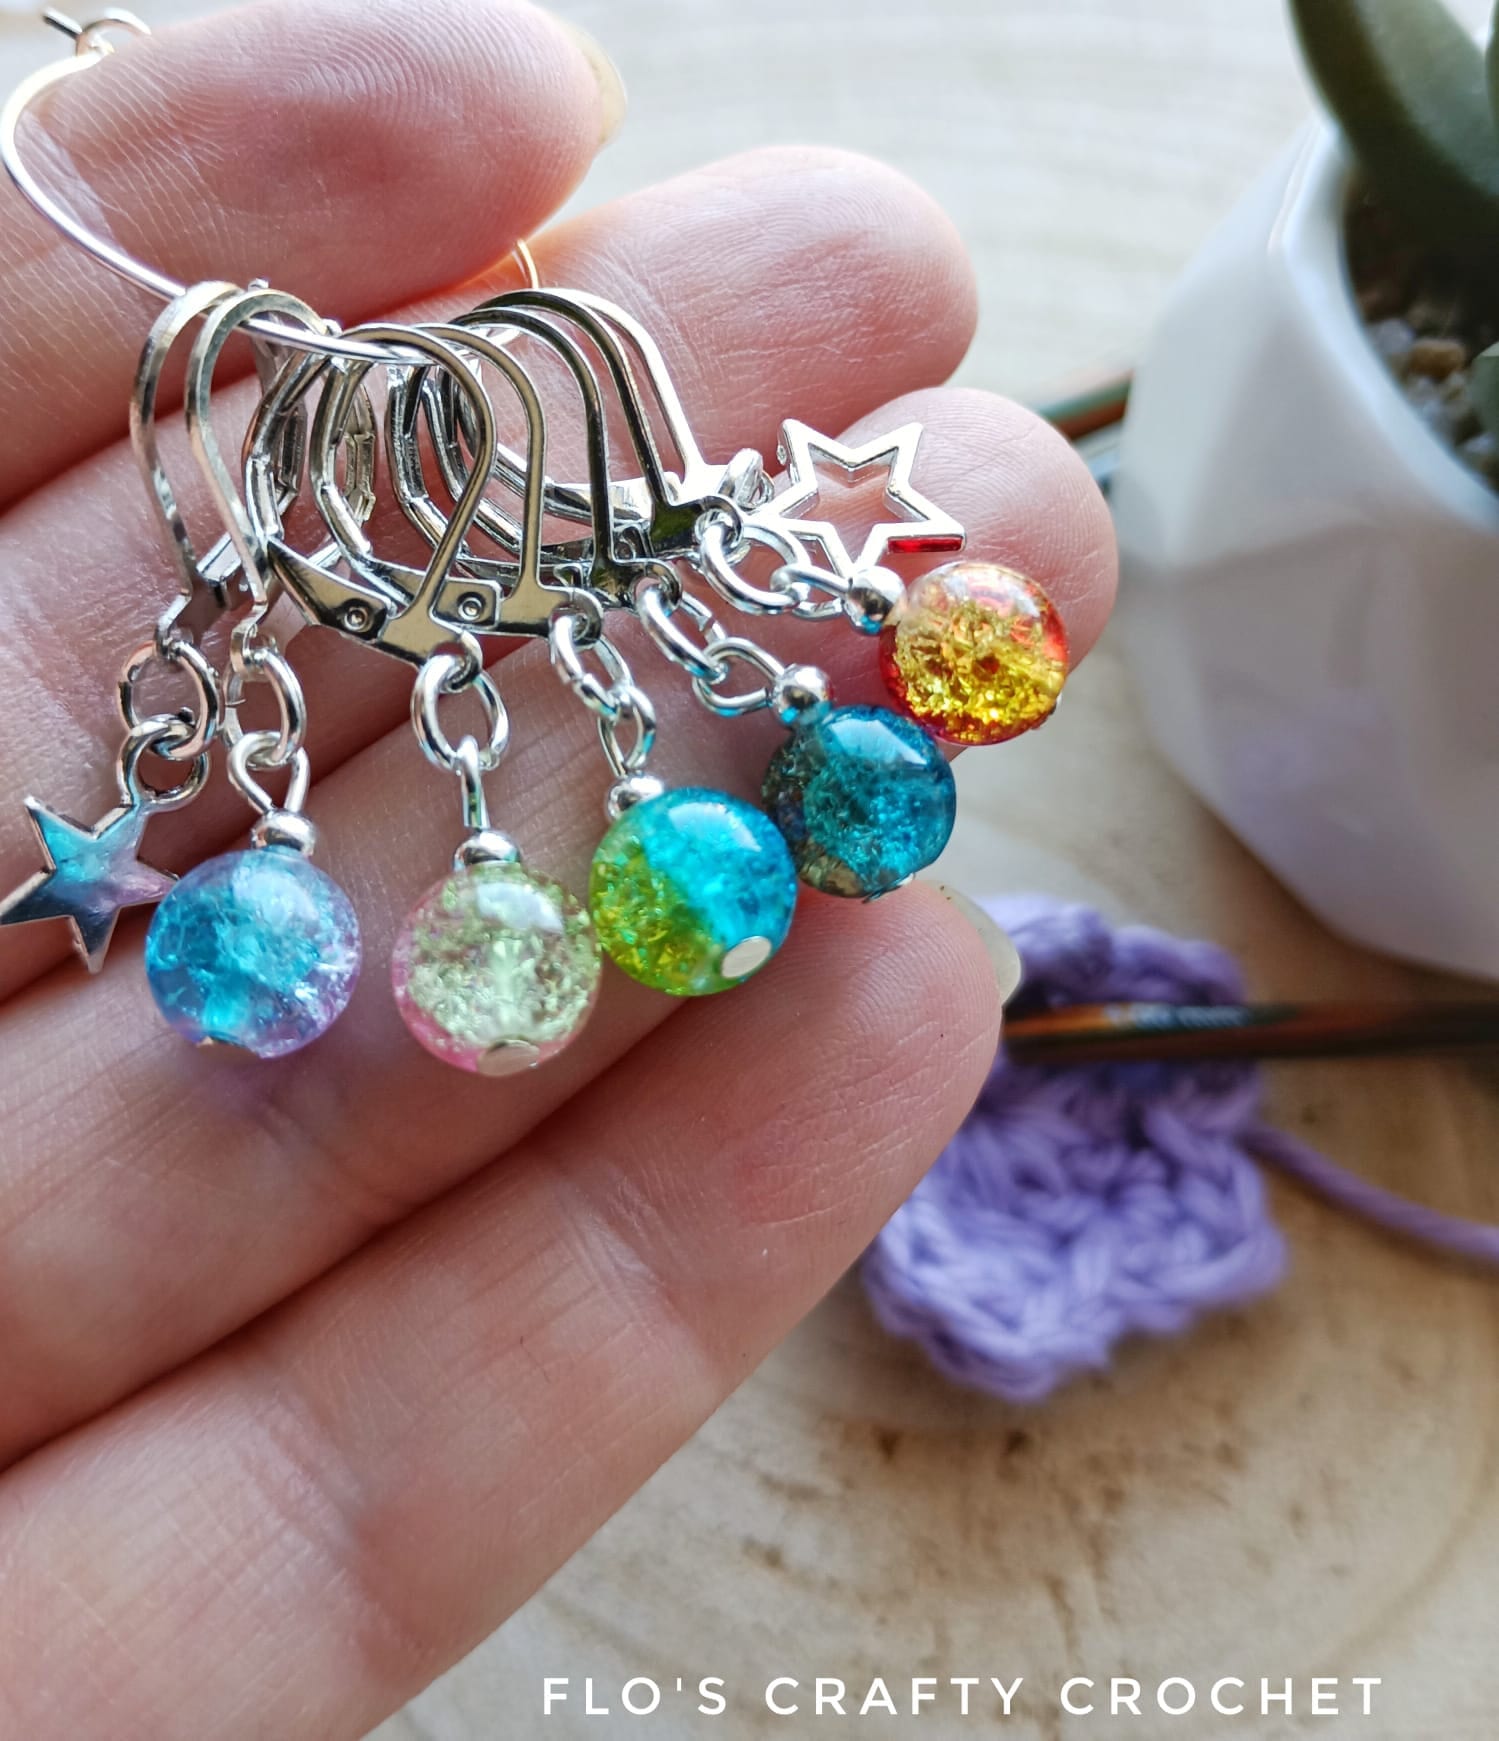 Large Star Stitch Markers for Knitting Needles - Set of 28 Seamless Rings